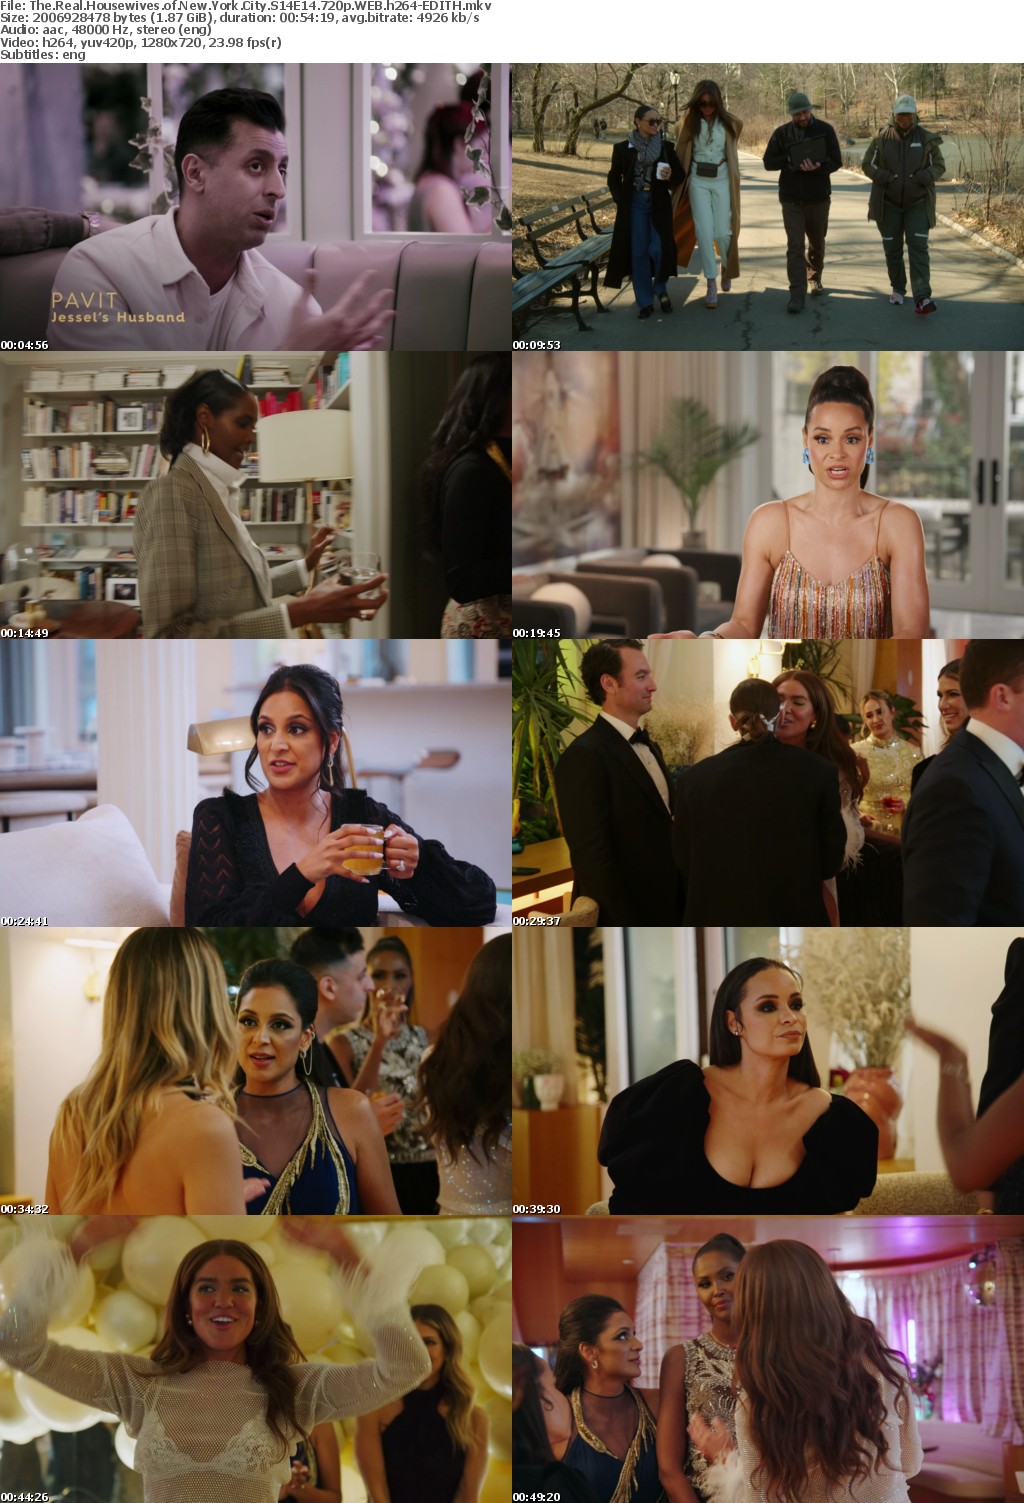 The Real Housewives of New York City S14E14 720p WEB h264-EDITH